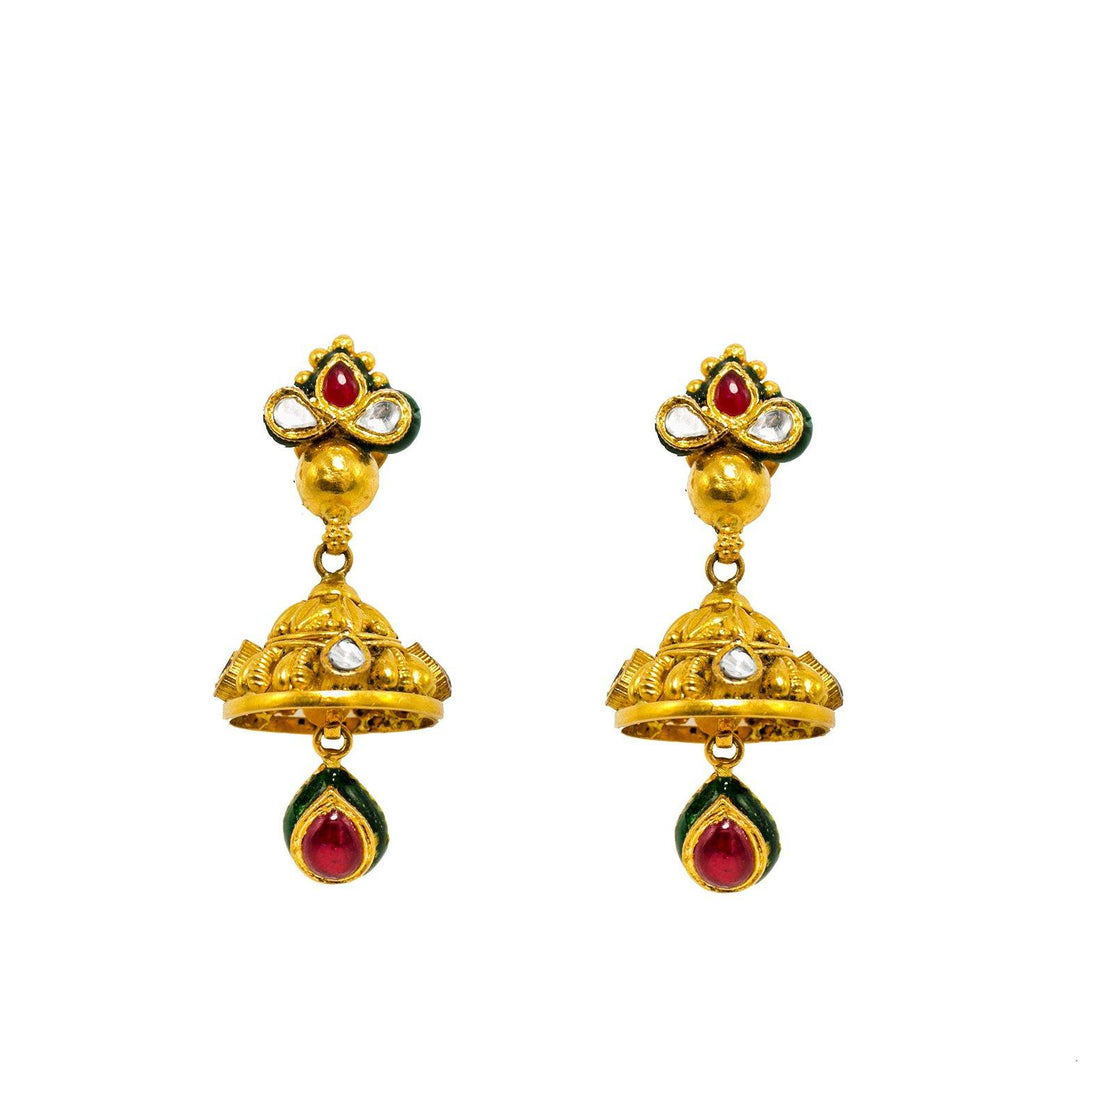 Below 5 grams Gold Earring Designs || Latest GOLD EARRING Collection -  YouTube | Simple gold earrings, Gold earrings designs, Bridal gold jewellery